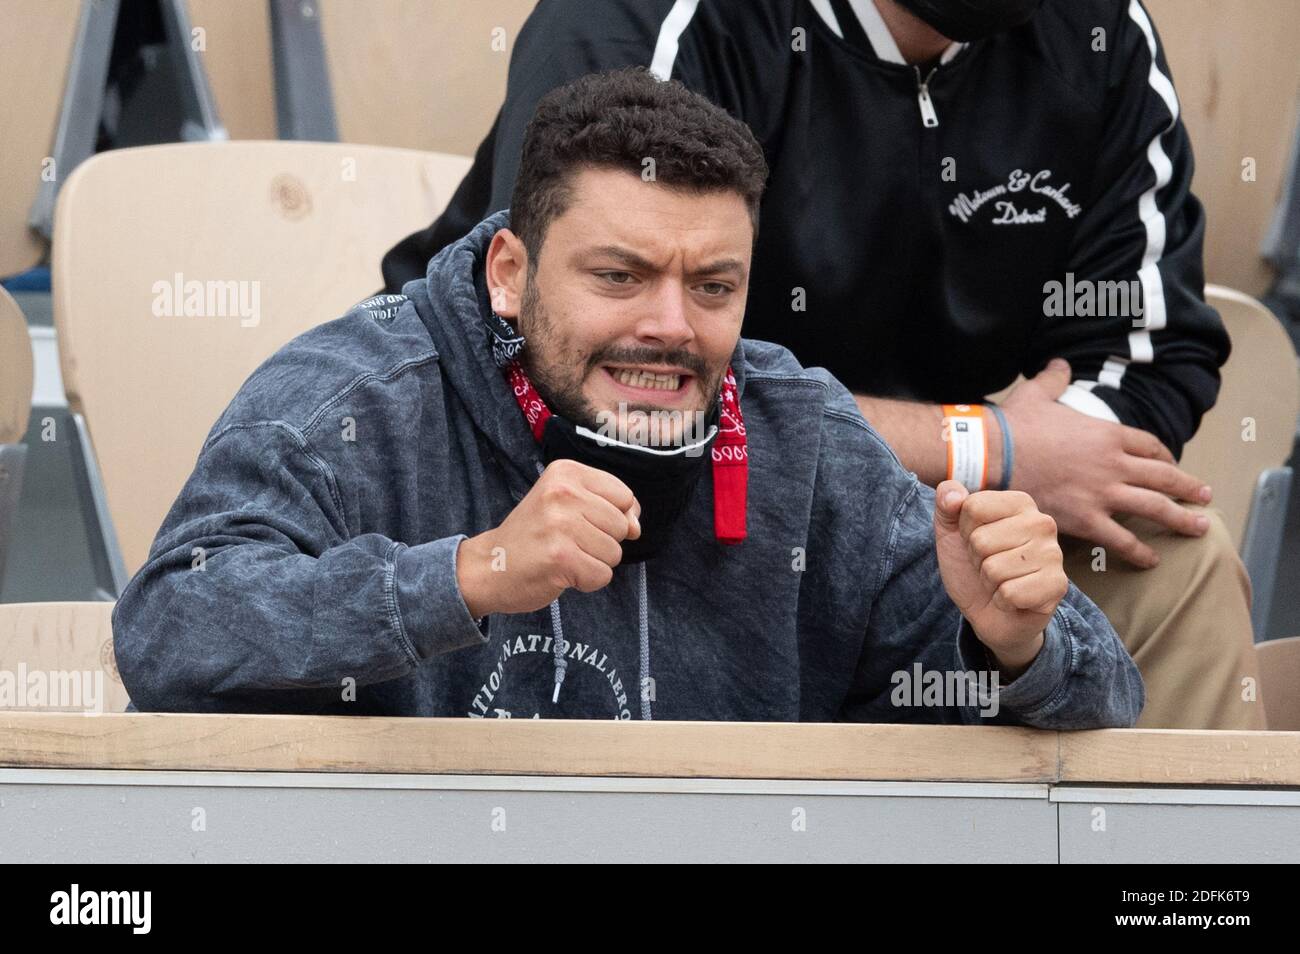 Kev Adams supporter of Stan Wawrinka of Switzerland during the French Open  at Roland Garros on October 02, 2020 in Paris, France. Photo by Laurent  Zabulon/ABACAPRESS.COM Stock Photo - Alamy